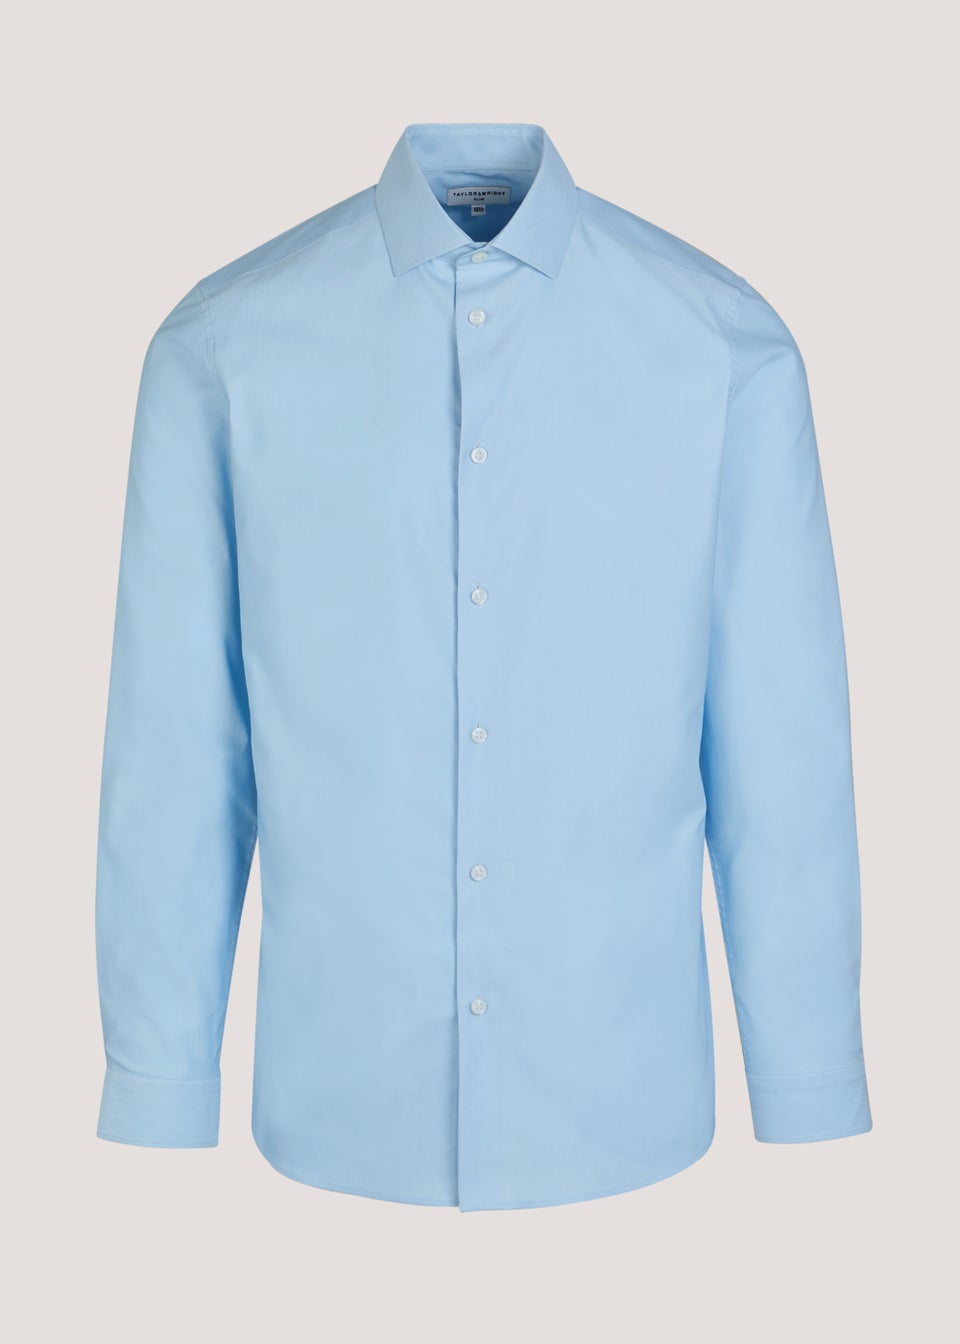 Taylor & Wright Blue Textured Slim Fit Shirt